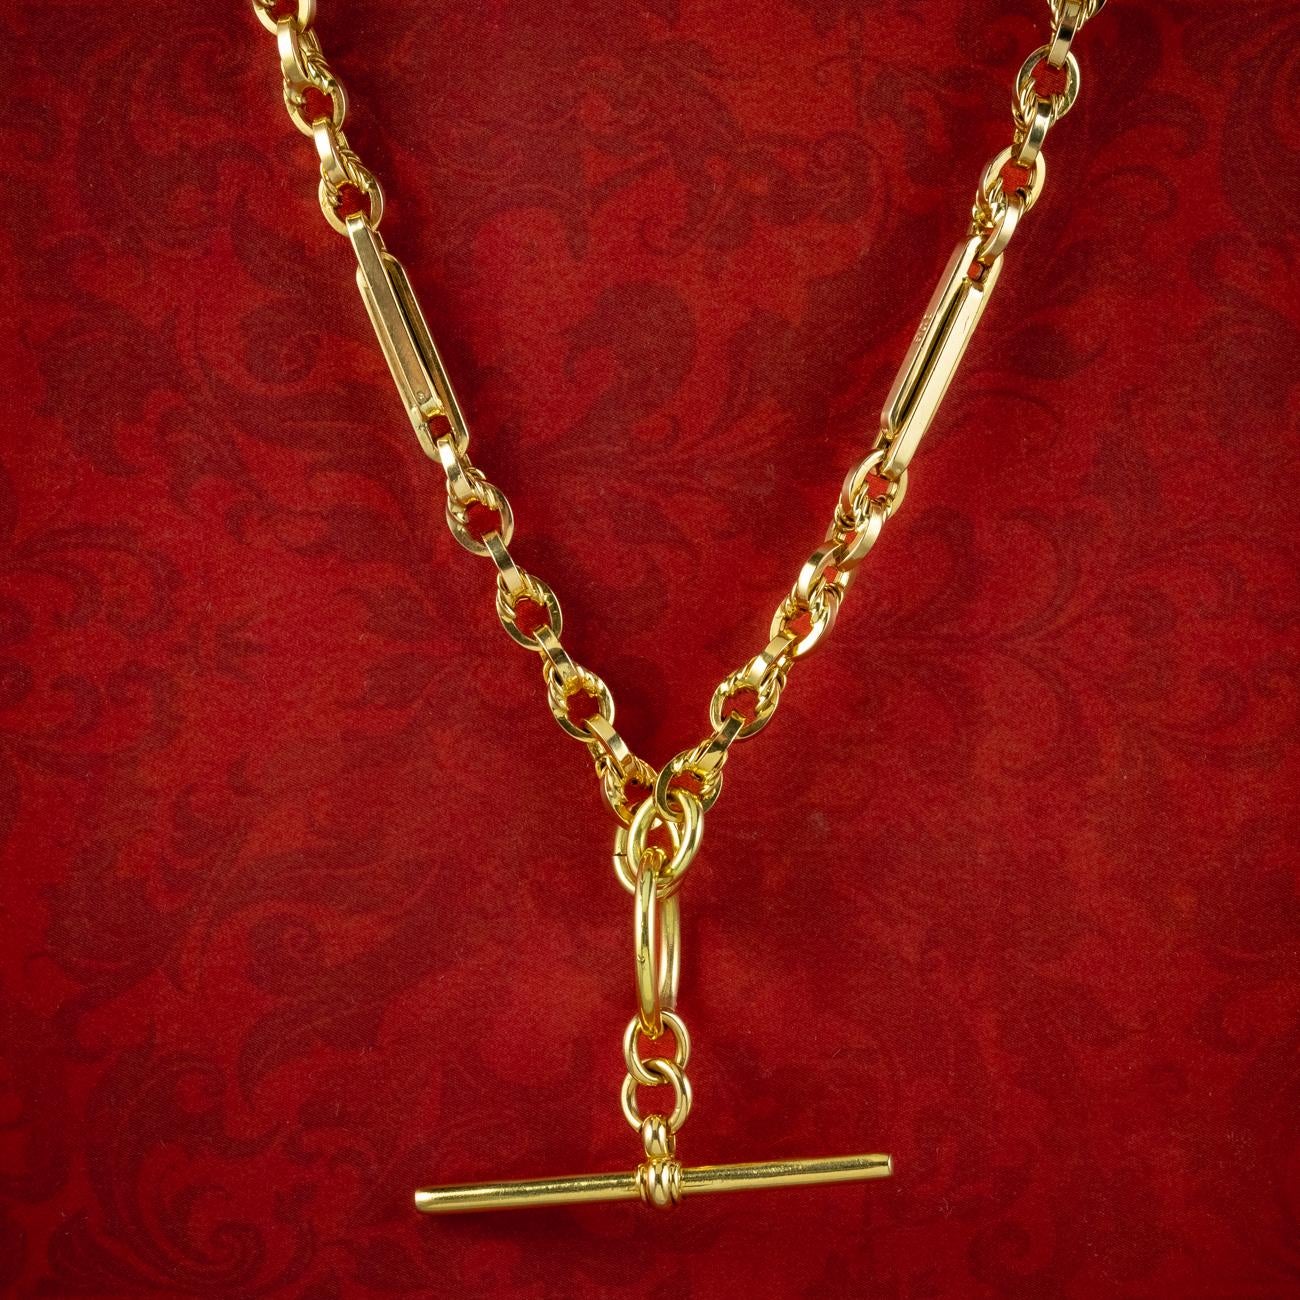 A classic antique Victorian Albert chain from the late 19th Century made up of interlocking fetter links, with smaller cable links in between, all crafted in 9ct gold with a bright, yellow gold bloom.

Albert chains were popularised and named after